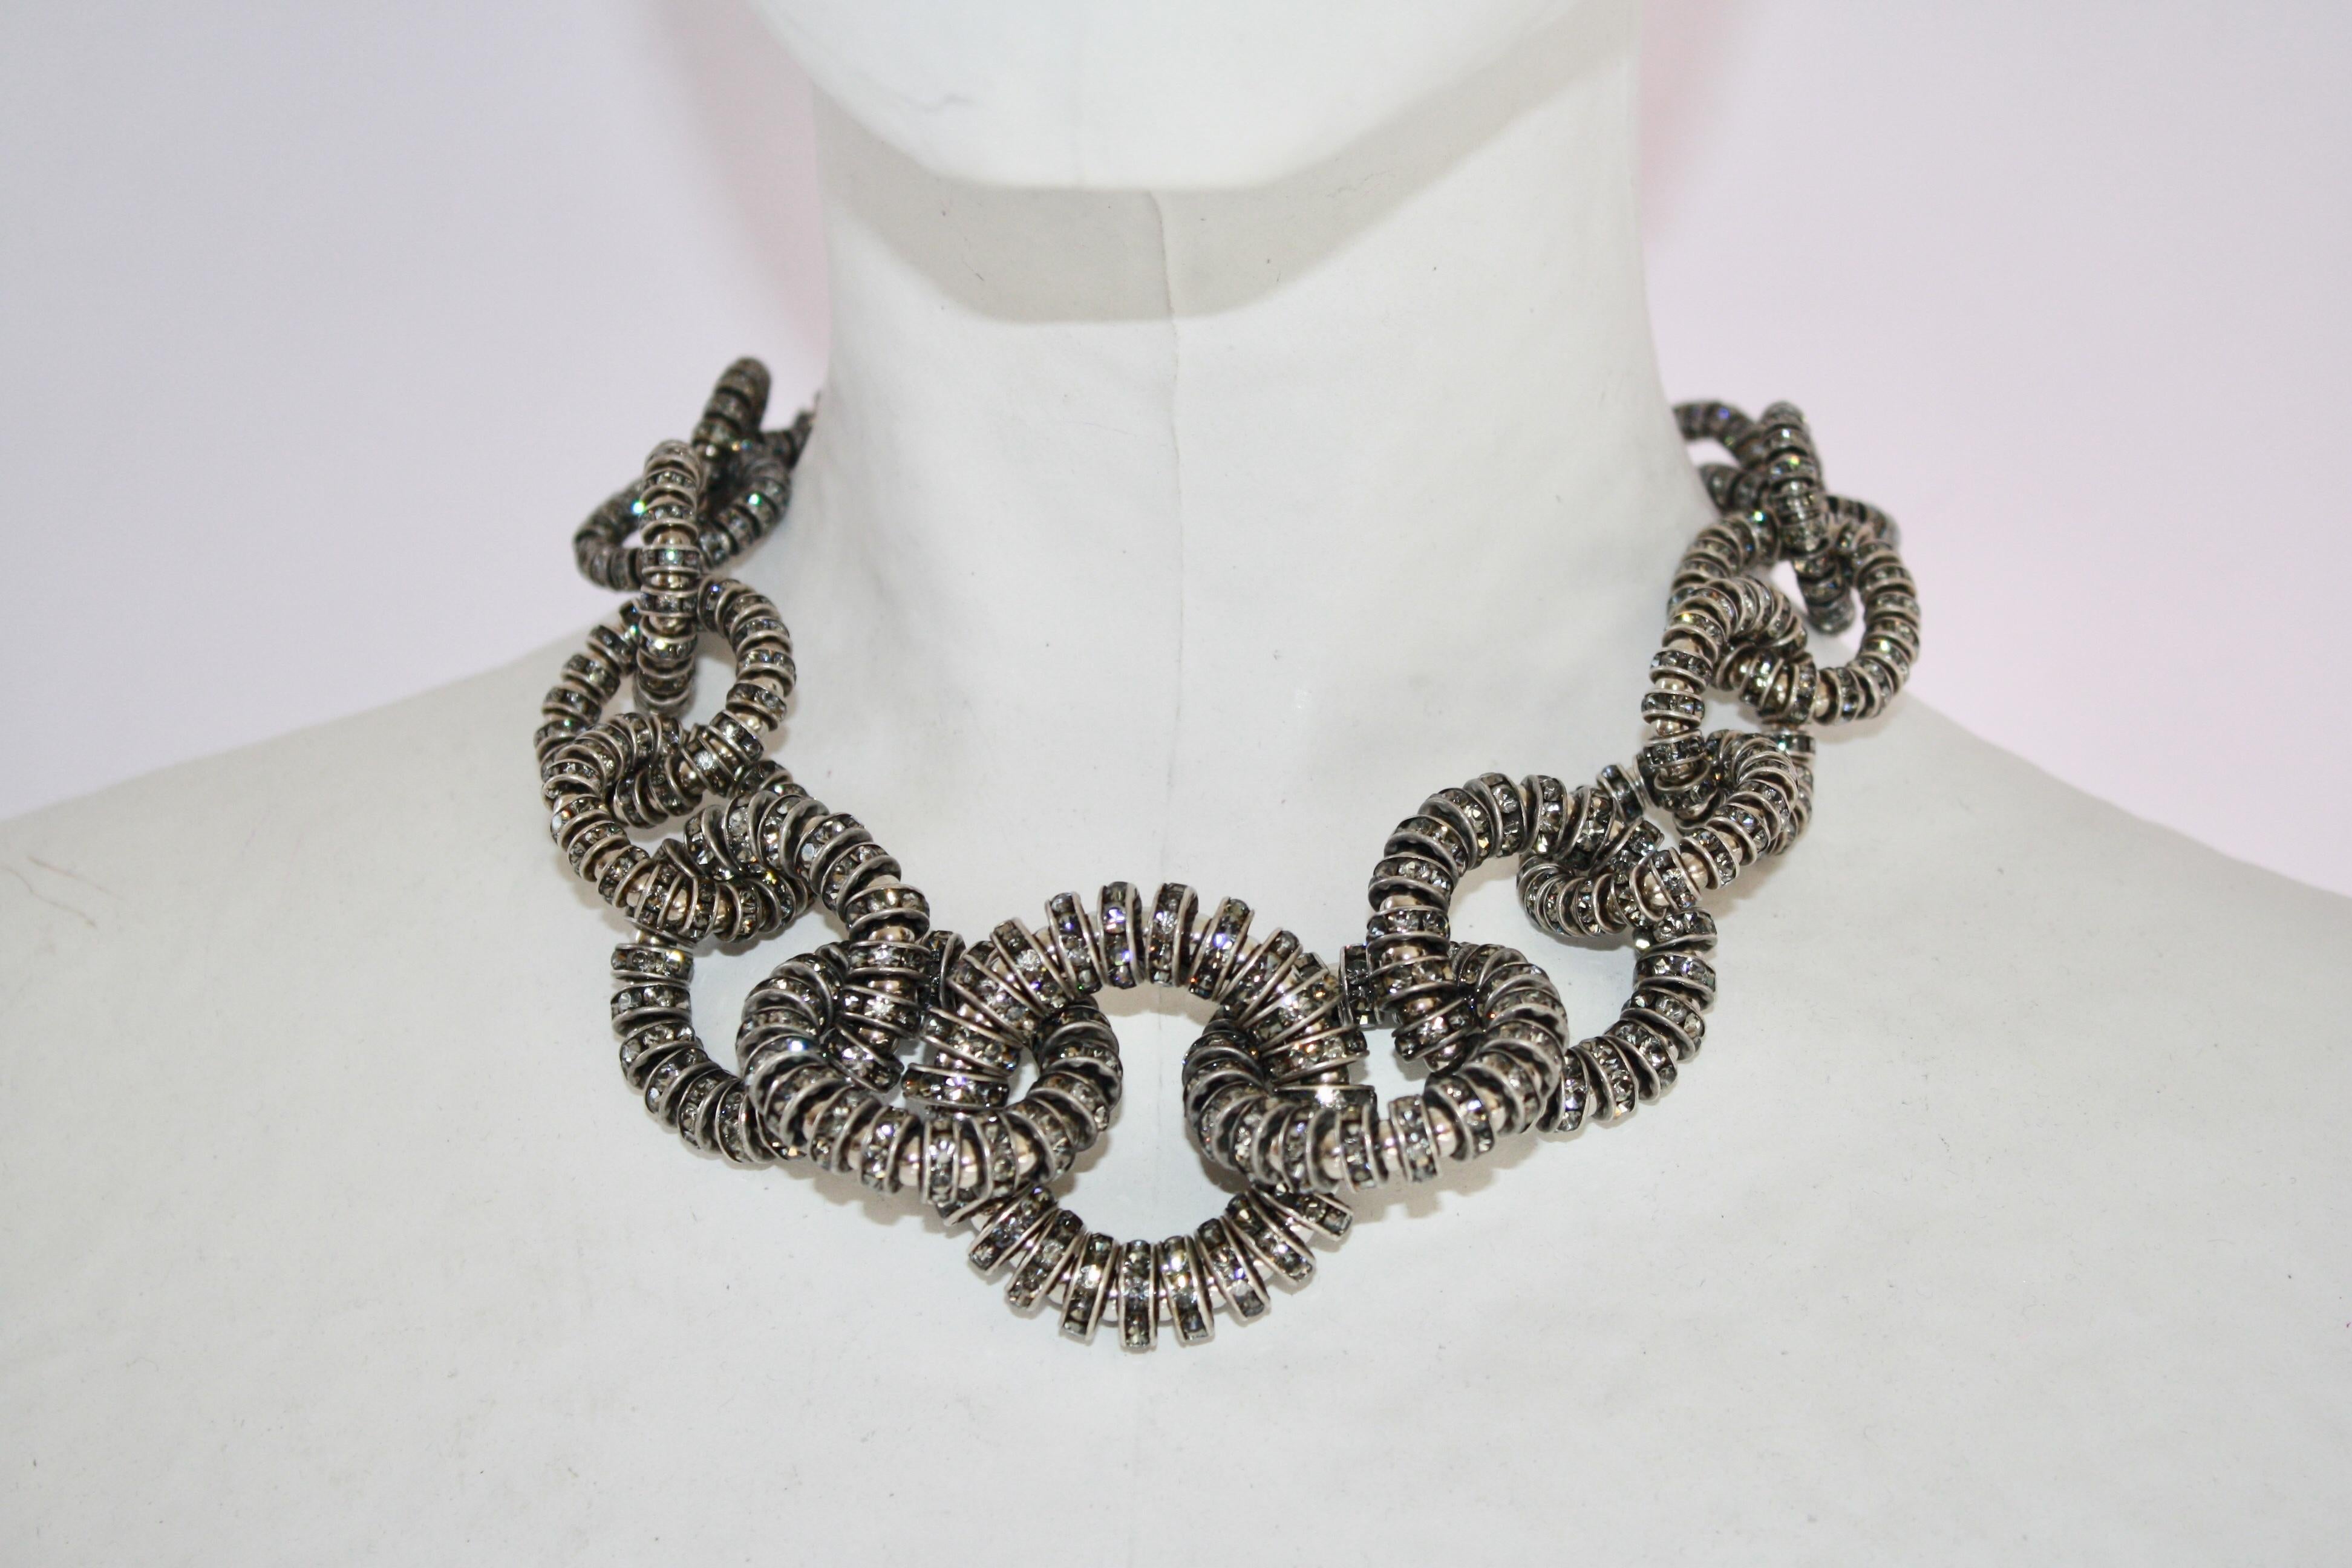 Choker necklace made with silver and Swarovski crystal rondelles from Francoise Montague. 

16” plus 3” extension 
Largest link is 1 3/4 “
Smallest link is 3/4”